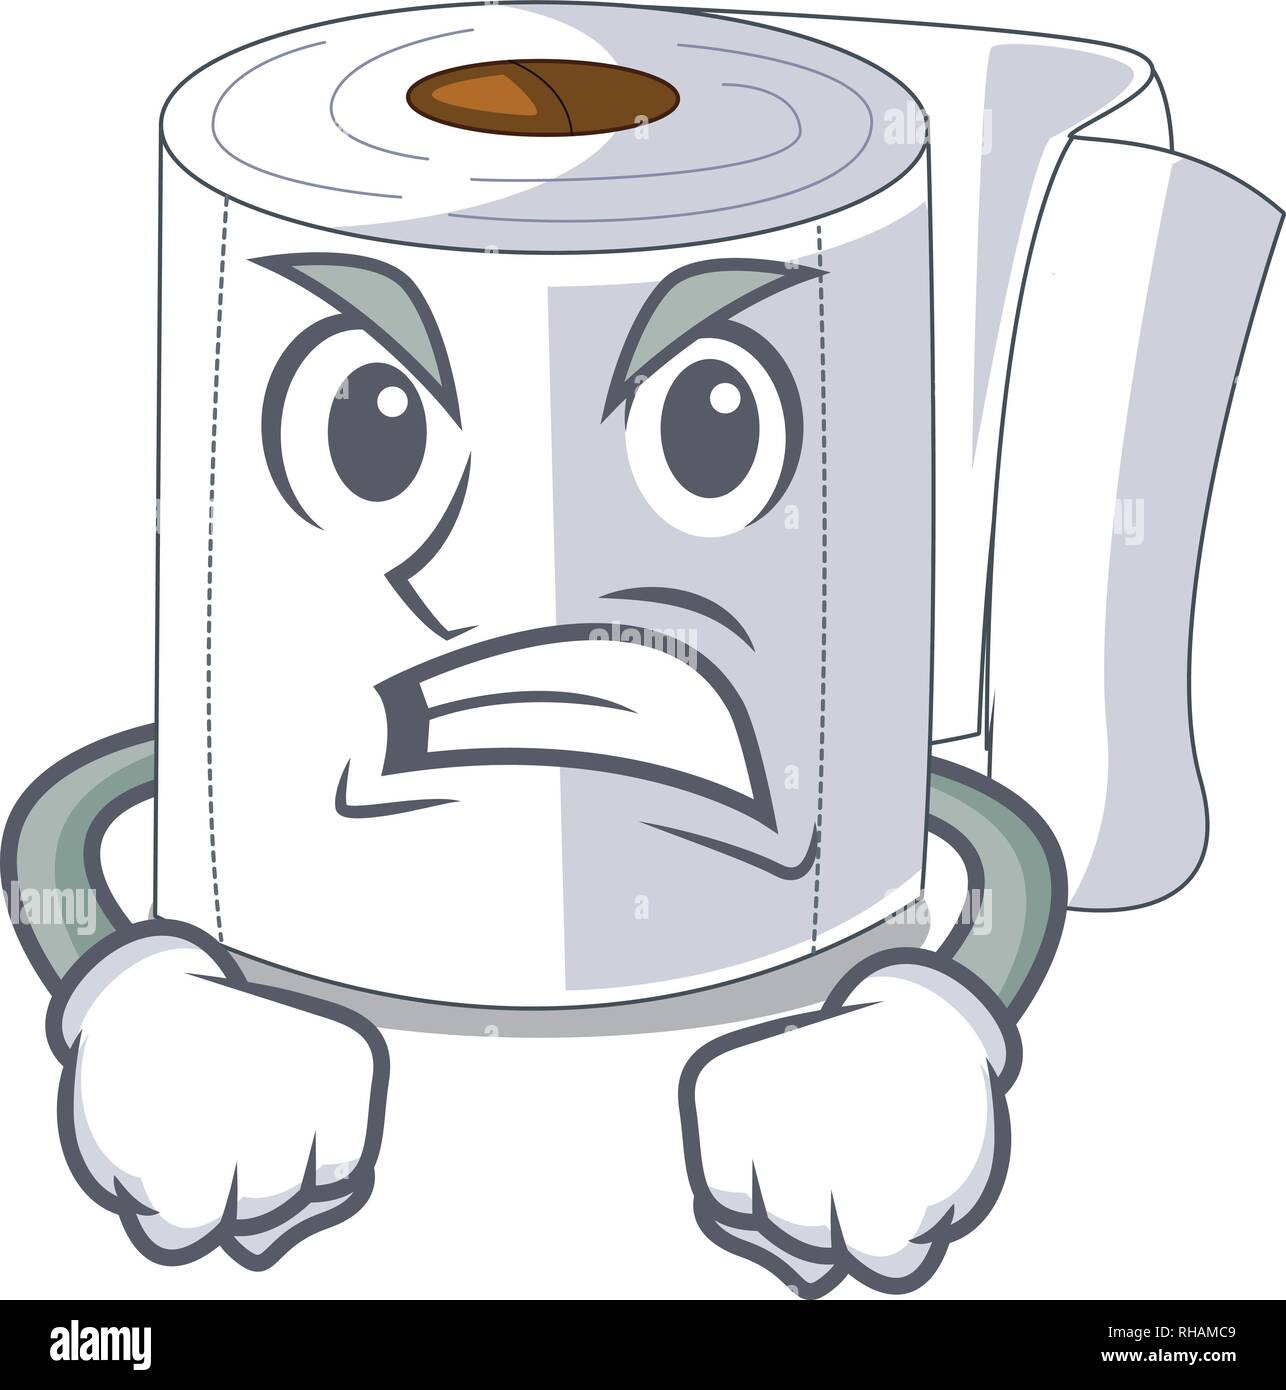 Angry toilet paper in shape of mascot Stock Vector